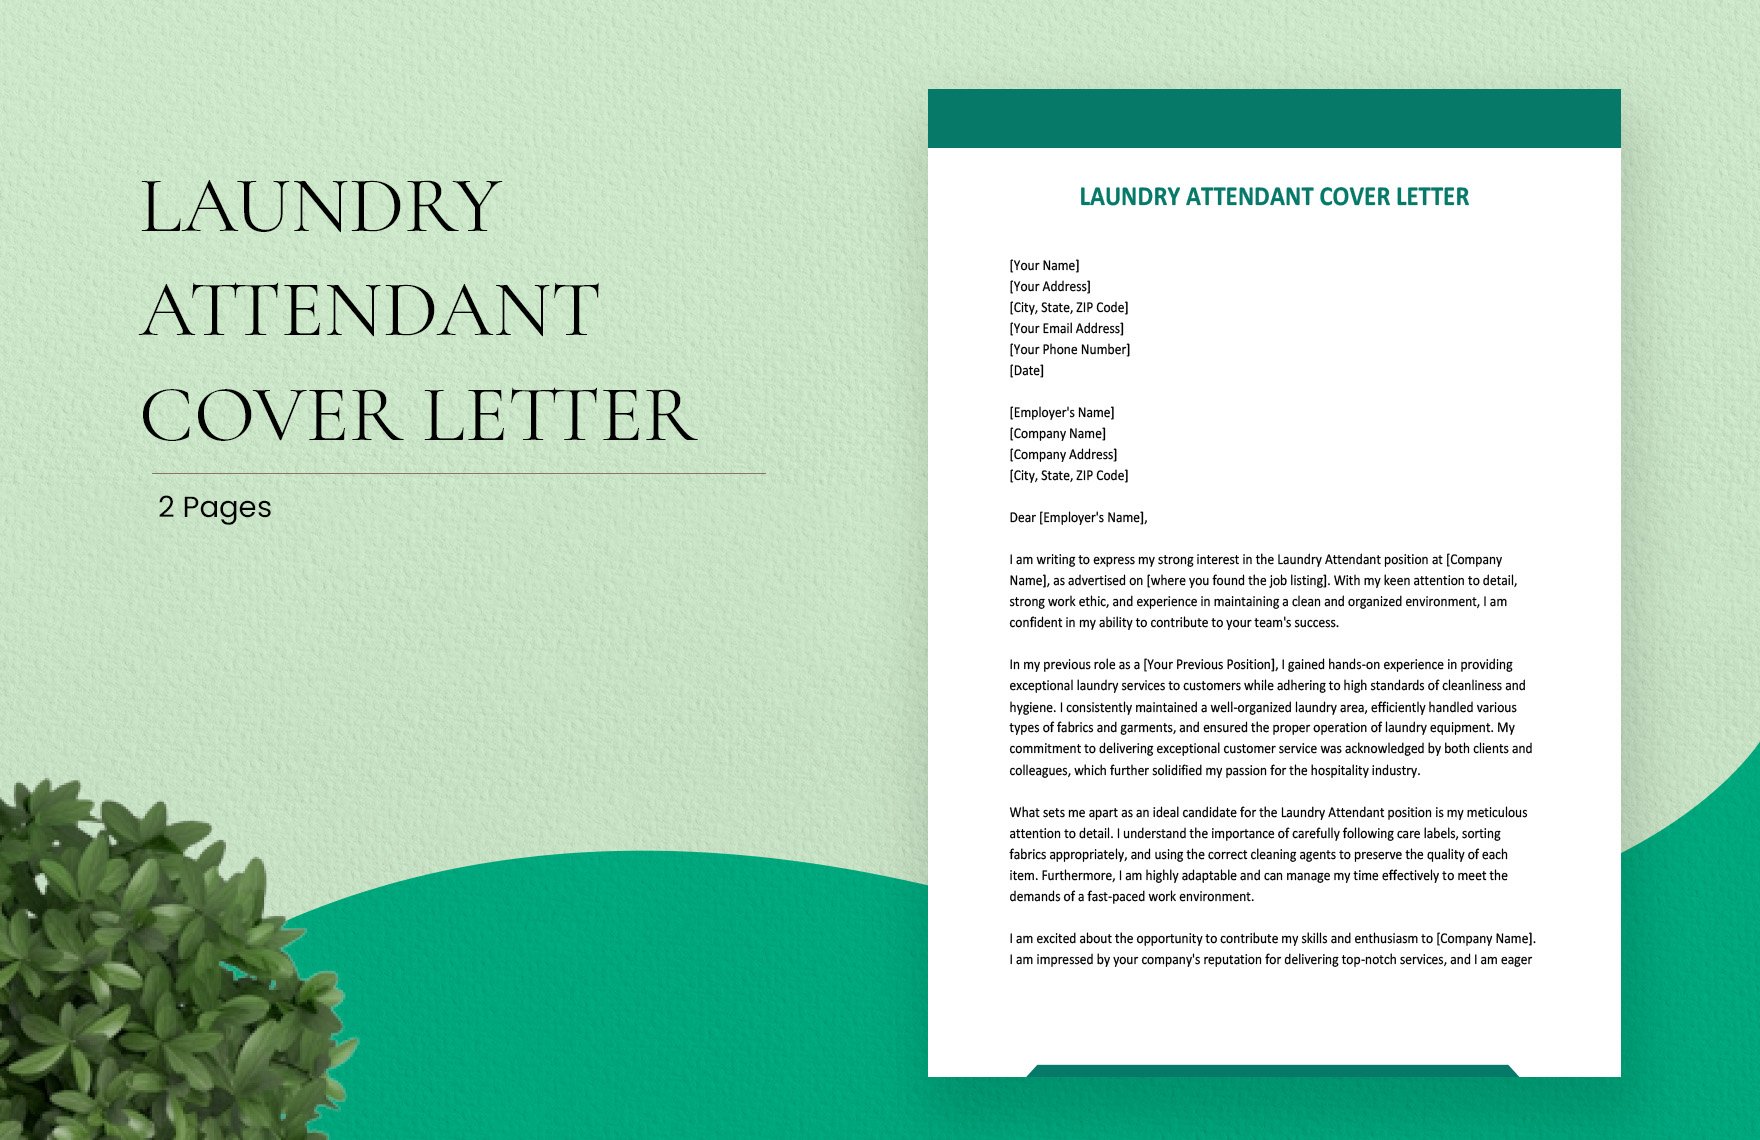 Laundry Attendant Cover Letter in Word, Google Docs